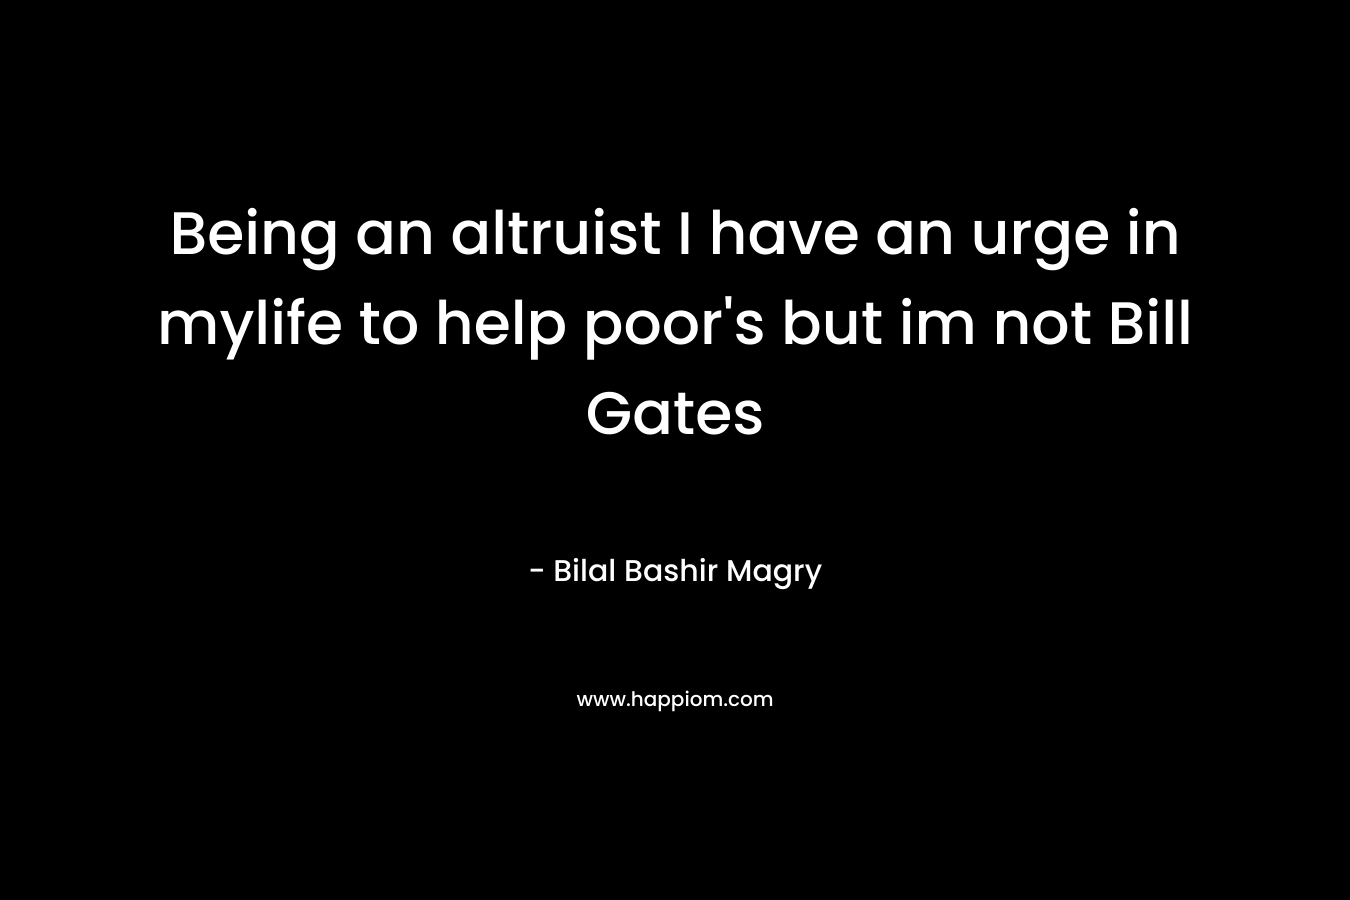 Being an altruist I have an urge in mylife to help poor’s but im not Bill Gates – Bilal Bashir Magry